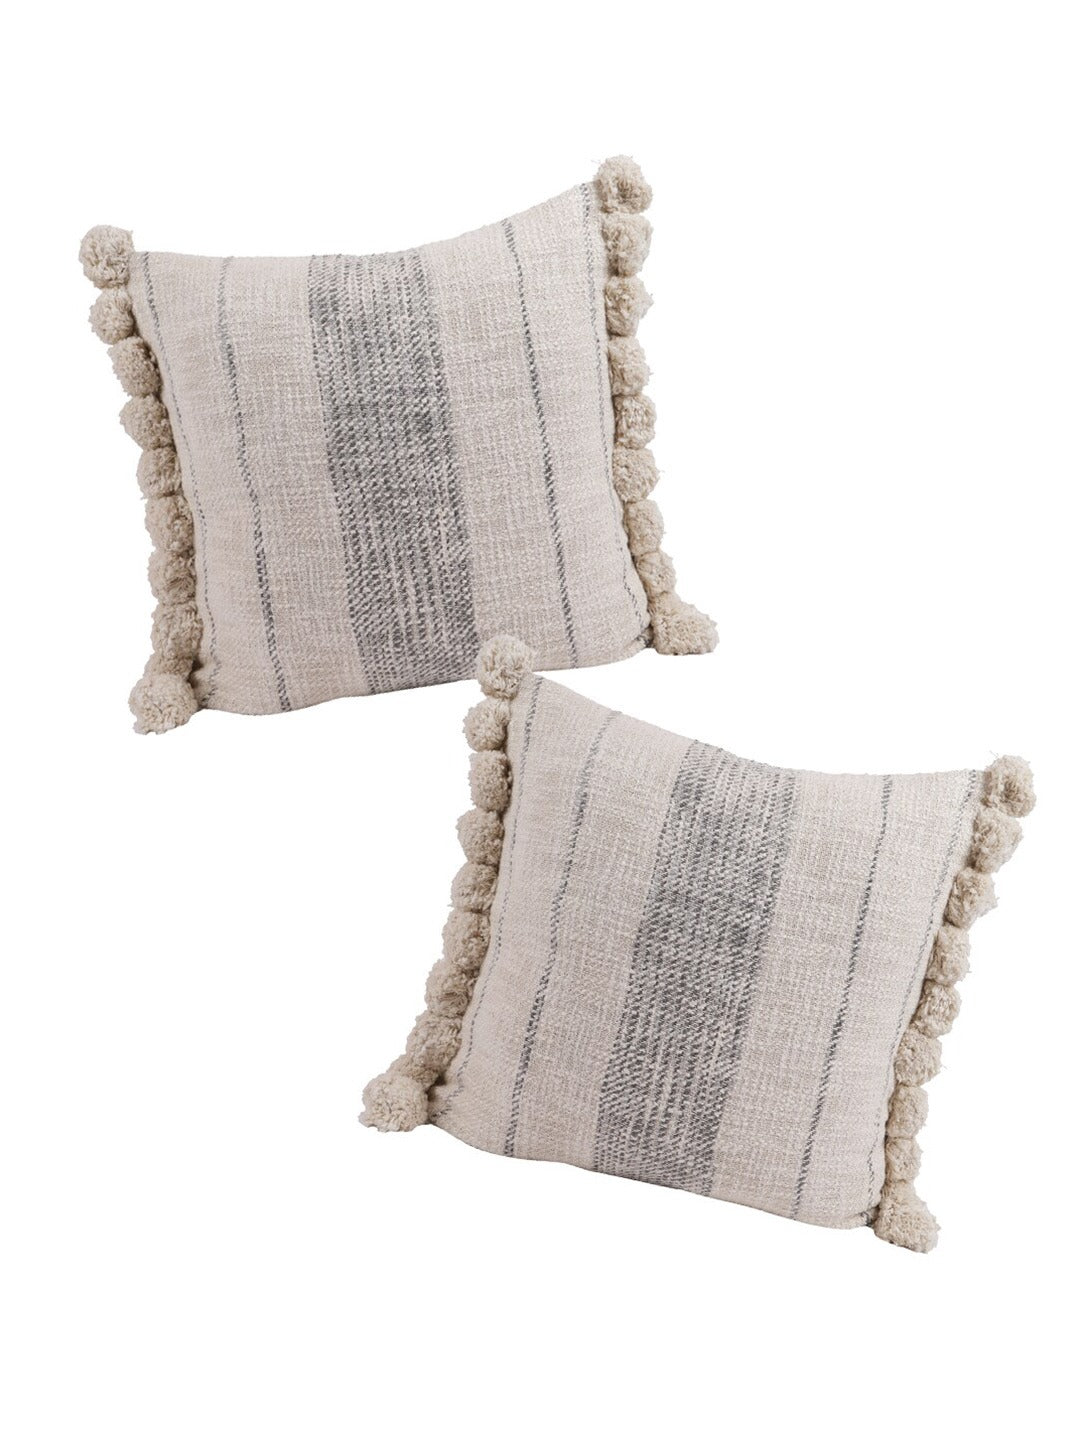 Cream & Black Set of 2 Embroidered Square Cushion Covers